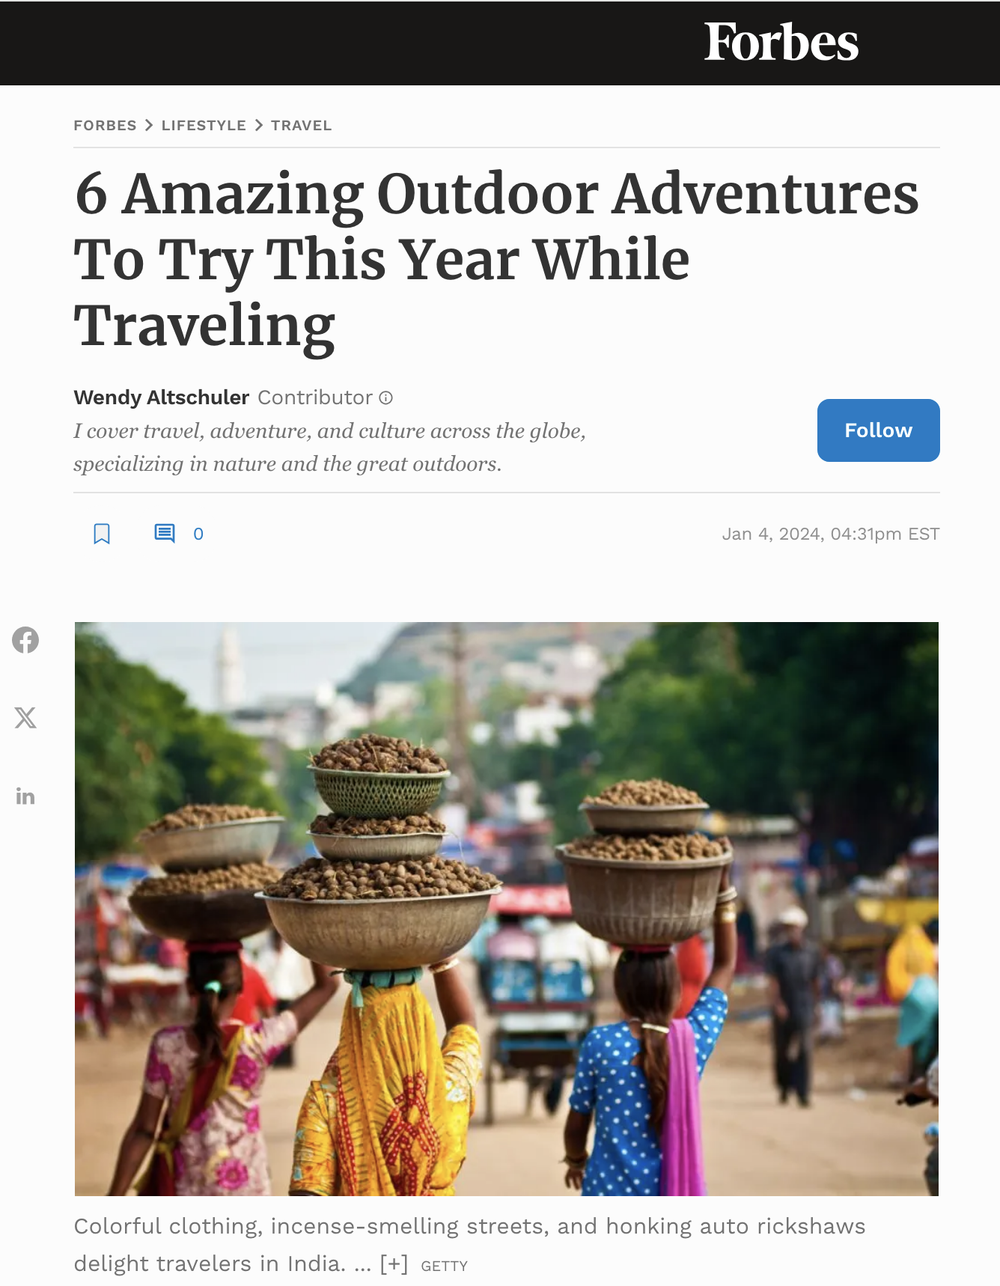 6 Amazing Outdoor Adventures To Try While Traveling This Year